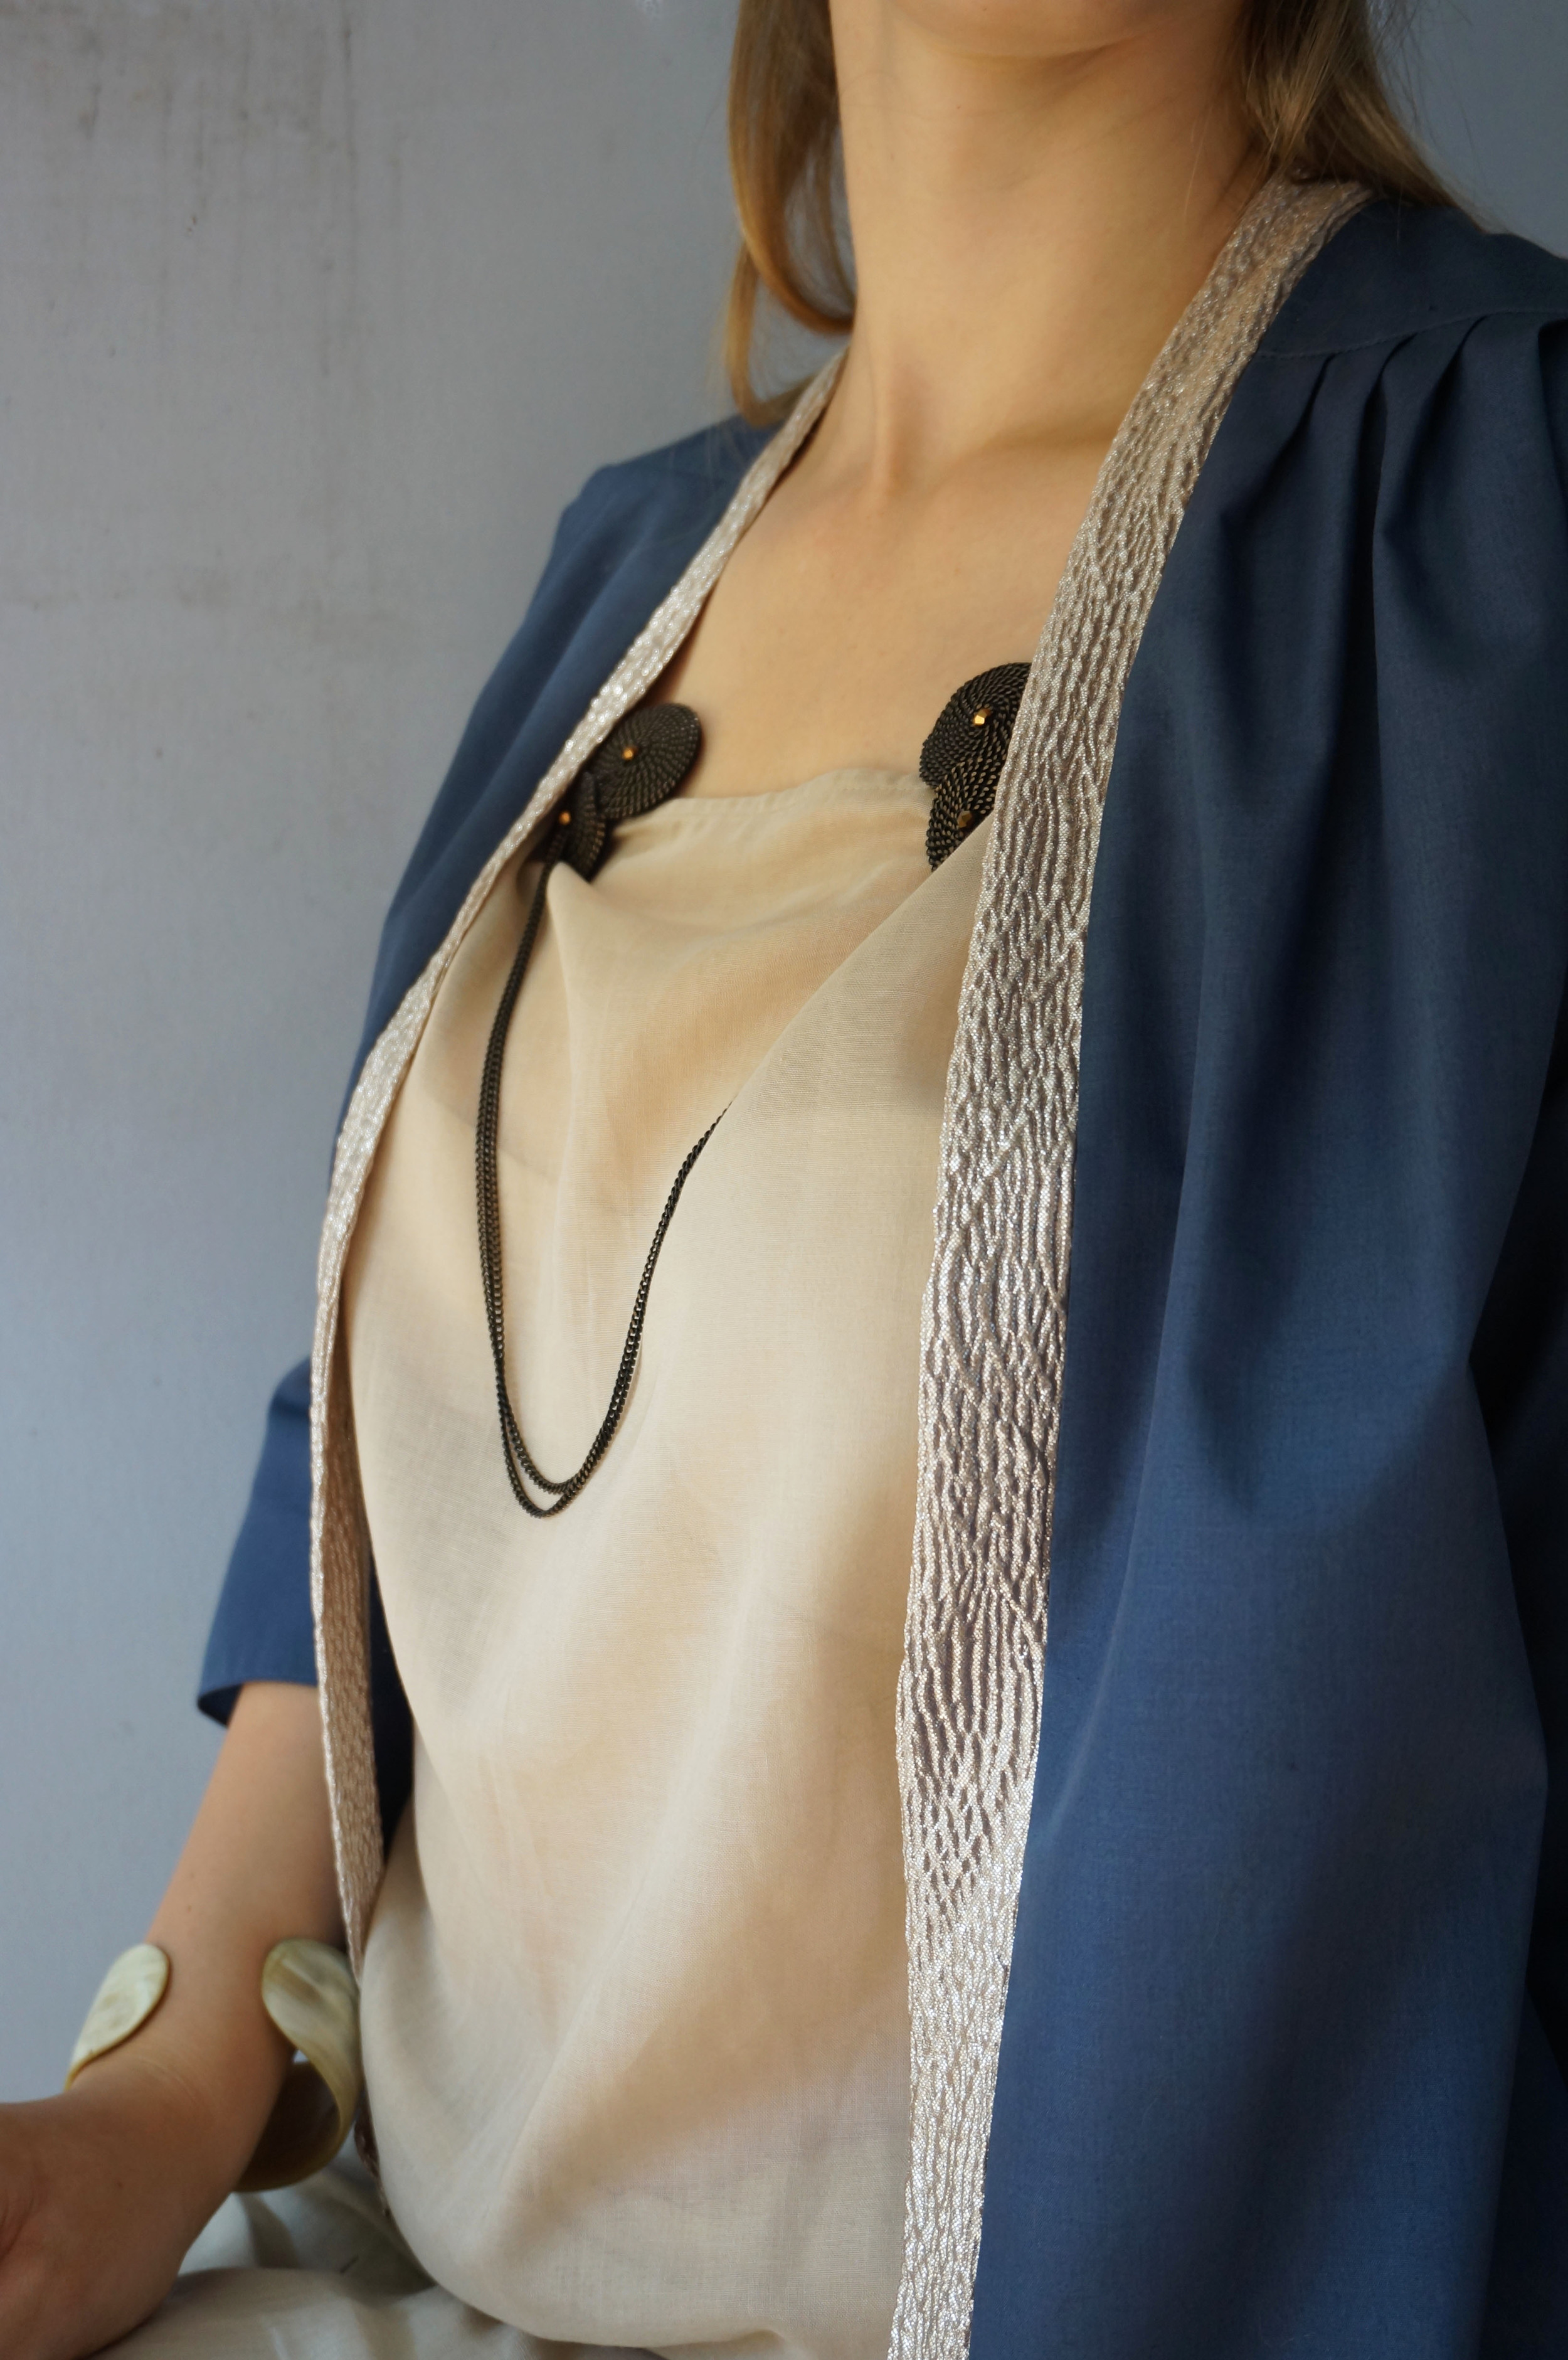  PHI JACKET - blue grey cotton upcycled gold collar -&nbsp;KIMONO TOP cream cotton, upcycled stitched patchwork belt 